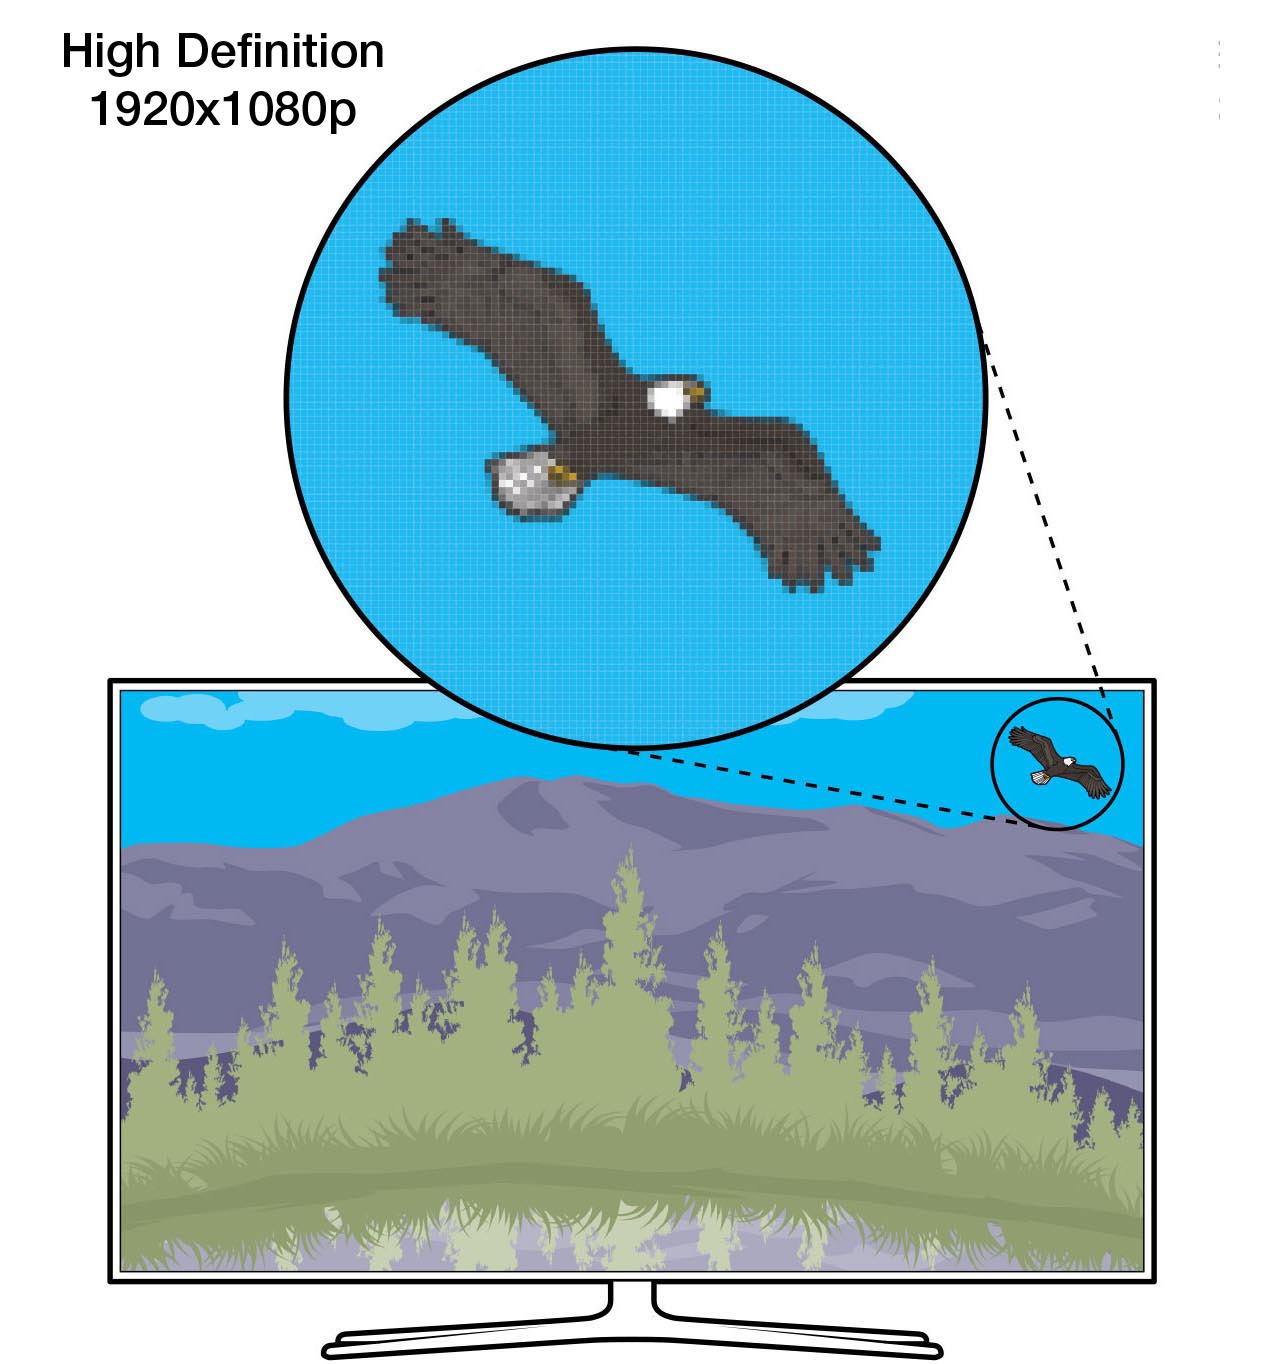 An illustration showing a close-up of the pixels of a 1080p HD TV, highlighting the visual detail capabilities of such a high-definition TV set.